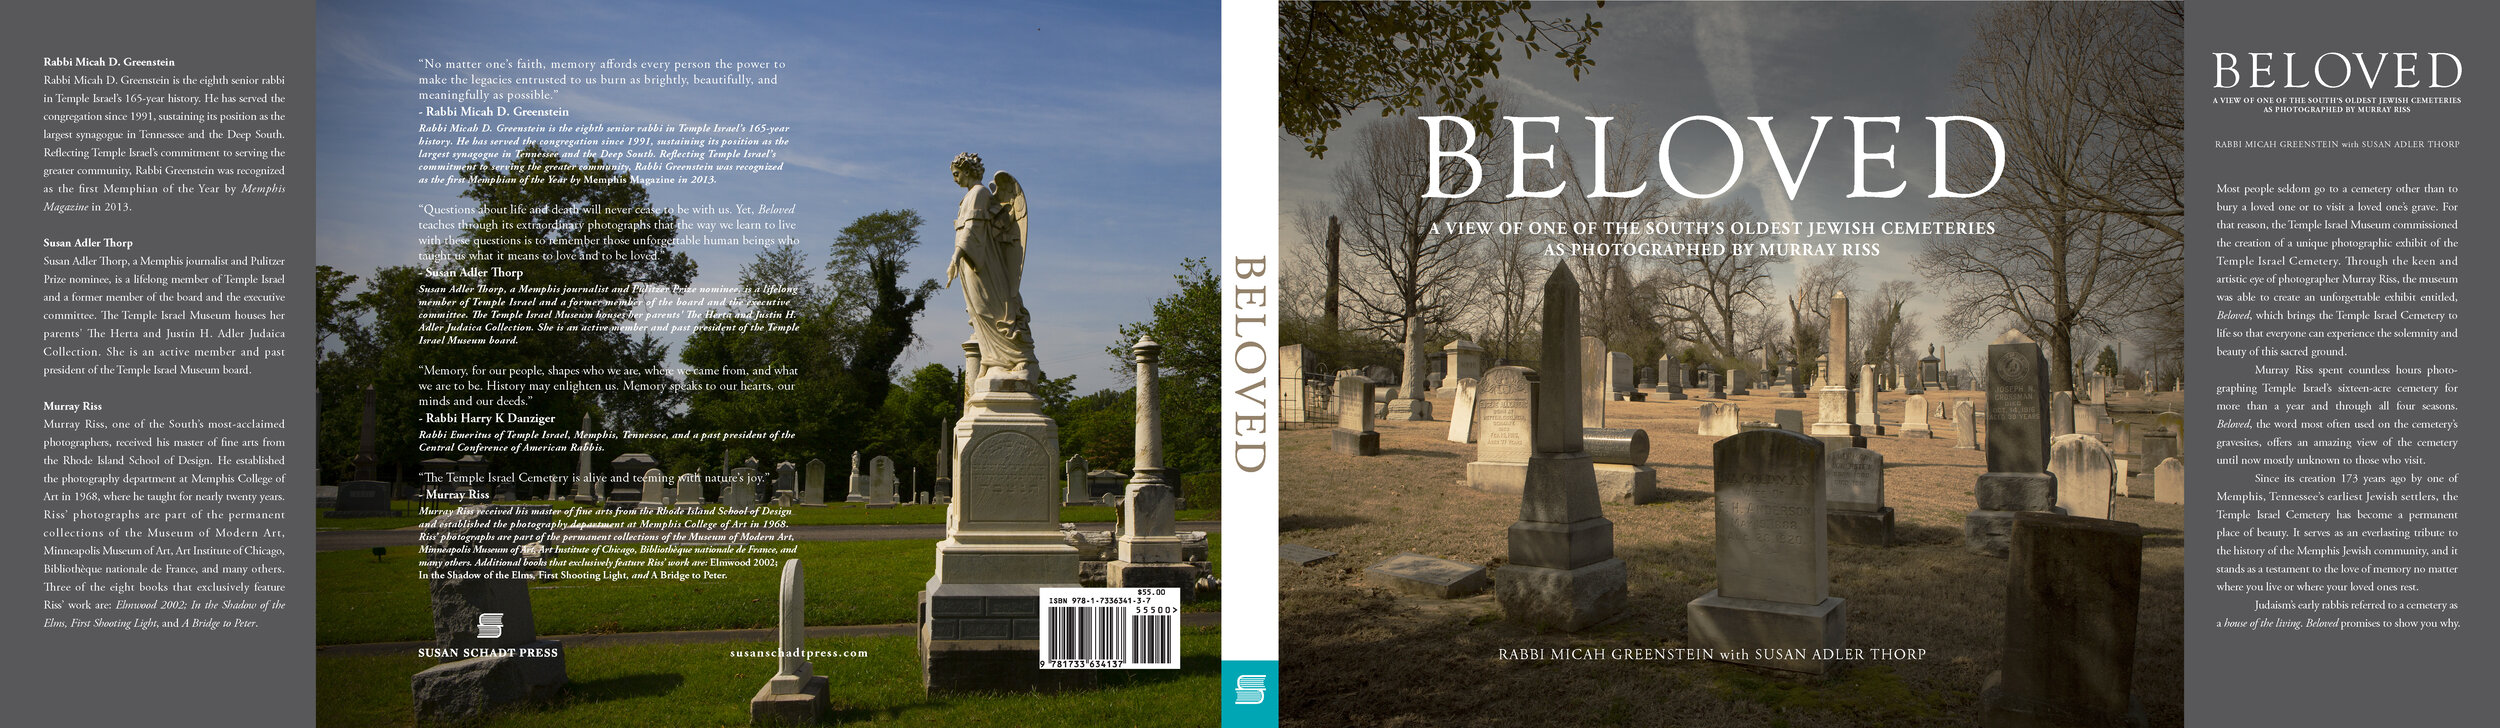  BELOVED dust jacket  Historic Temple Israel Cemetery Book Project  Photographs by Murray Riss  Design by Chuck Mitchell &amp; Reid Mitchell  Photo retouching by Reid Mitchell  Published by Susan Schadt Press 